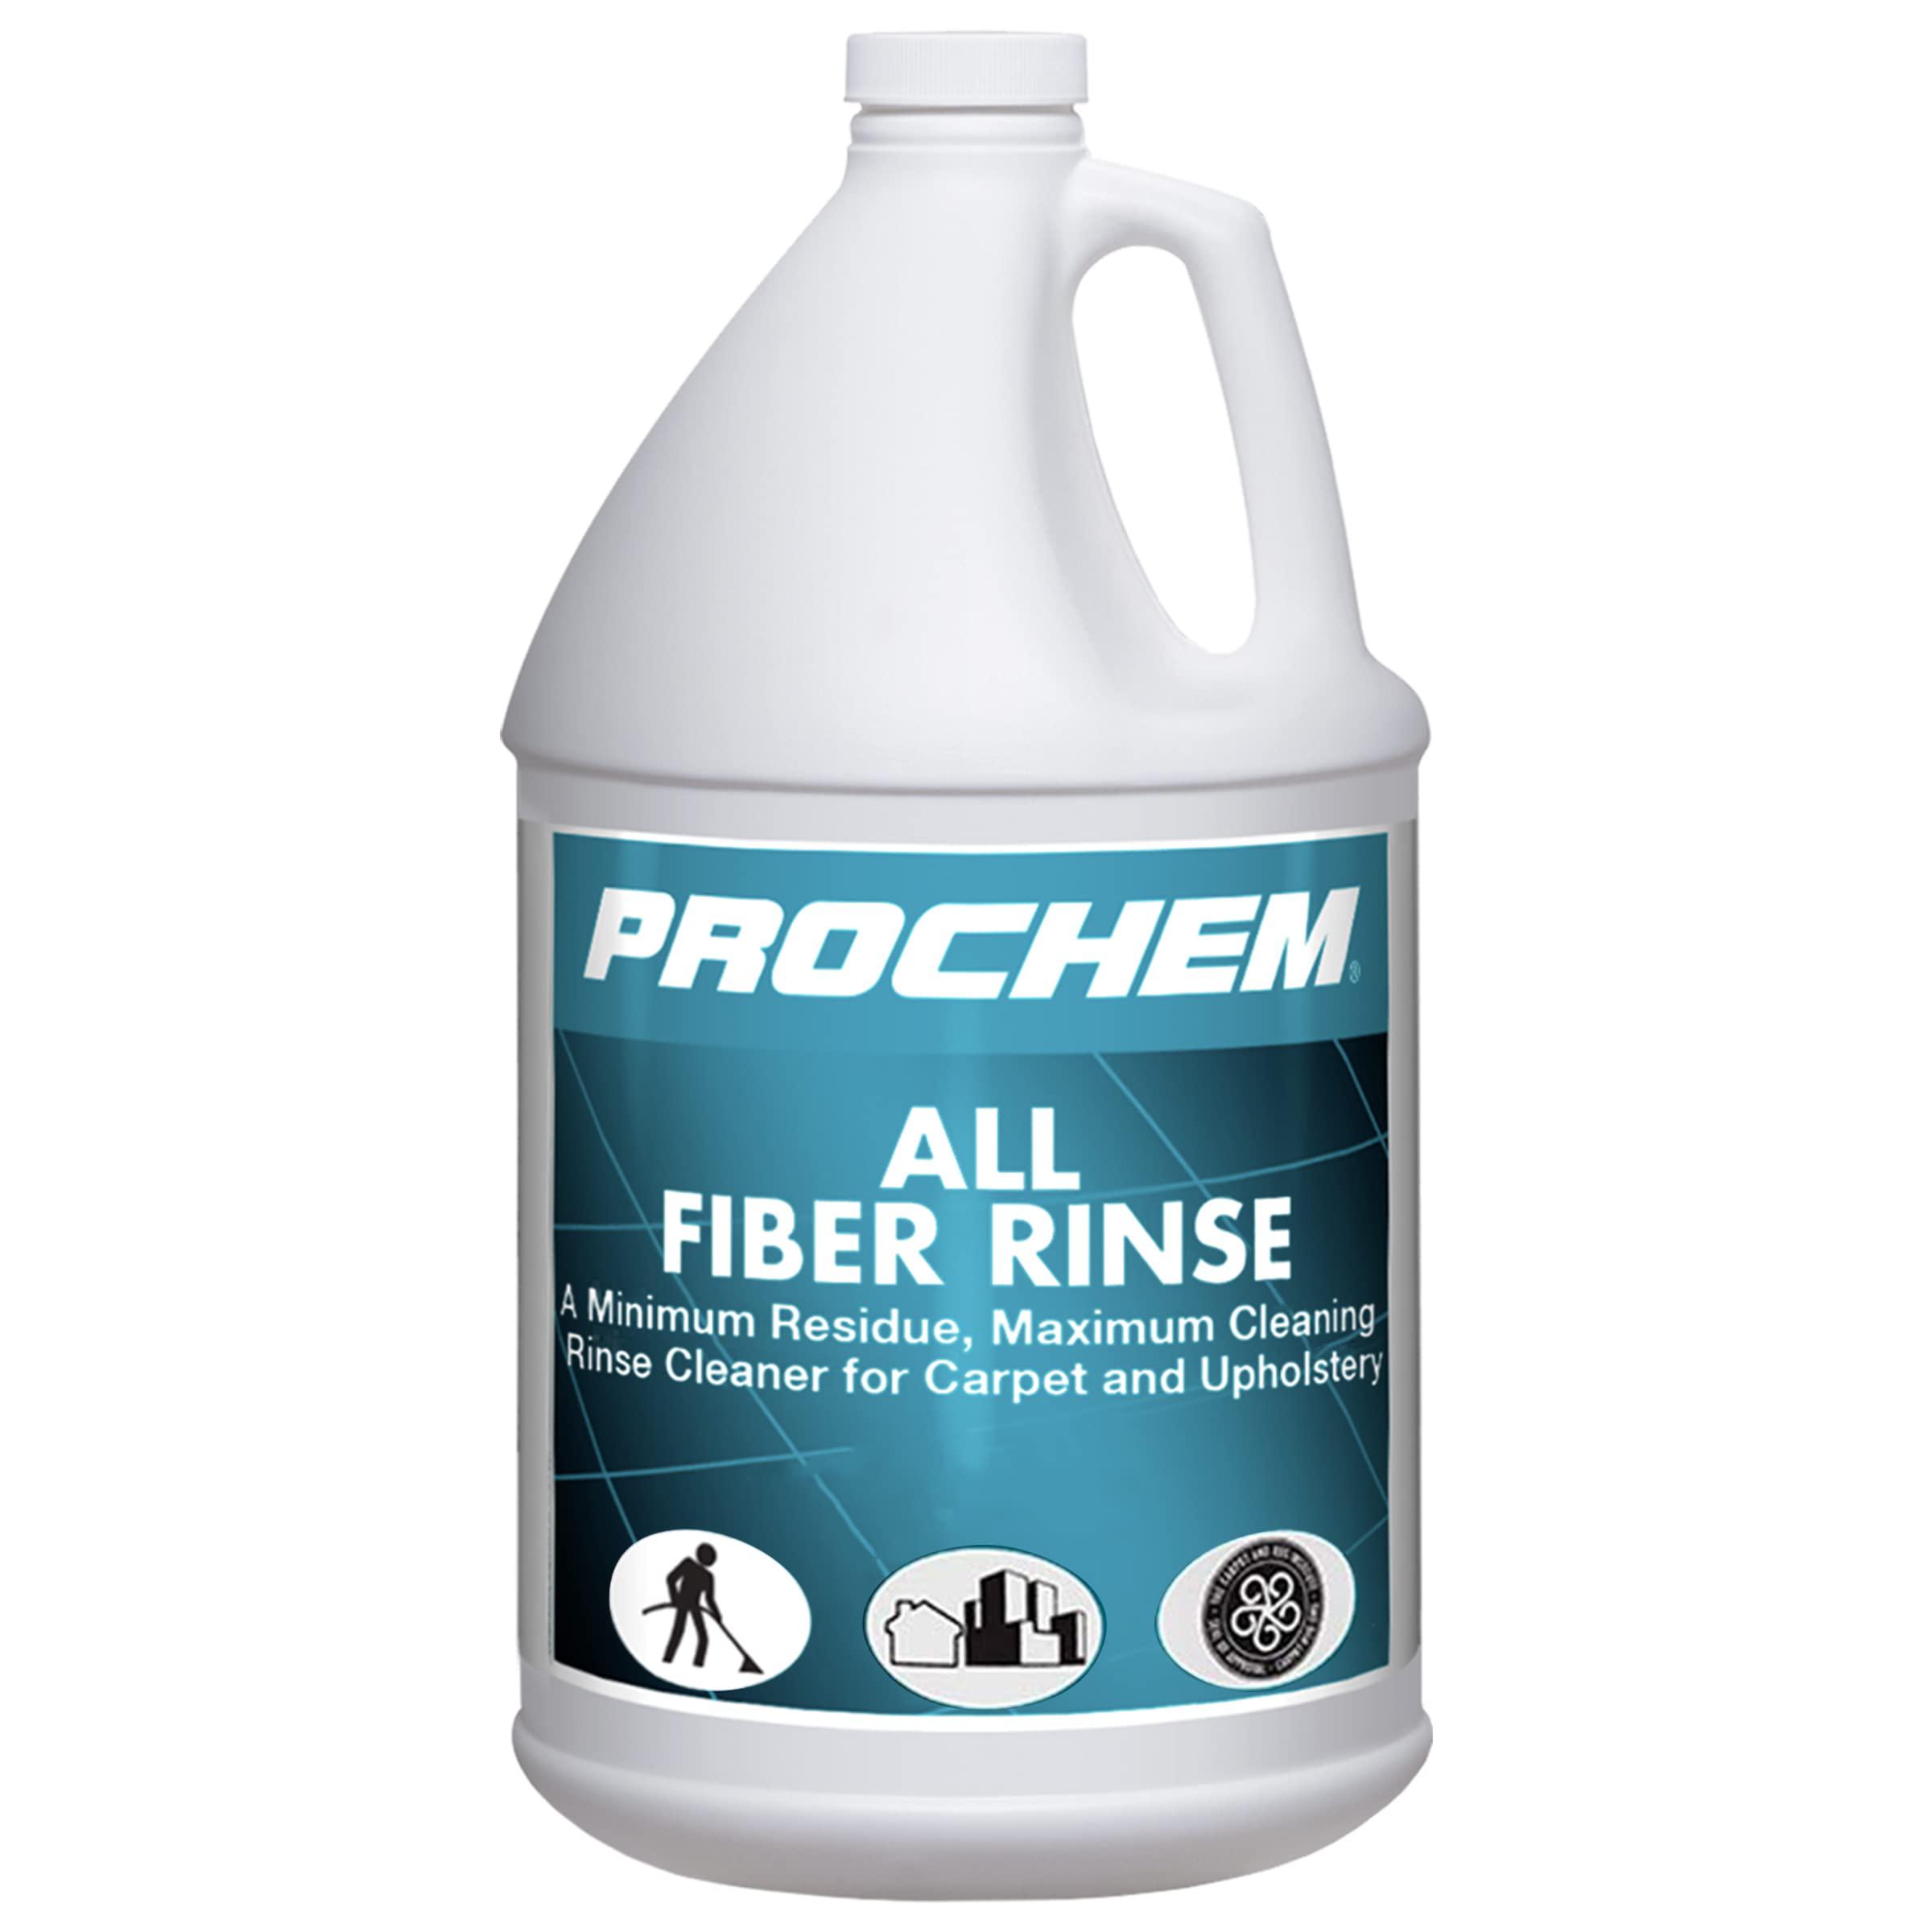 prochem all fiber rinse professional cleaning solution for carpet and upholstery, 1 gal bottle